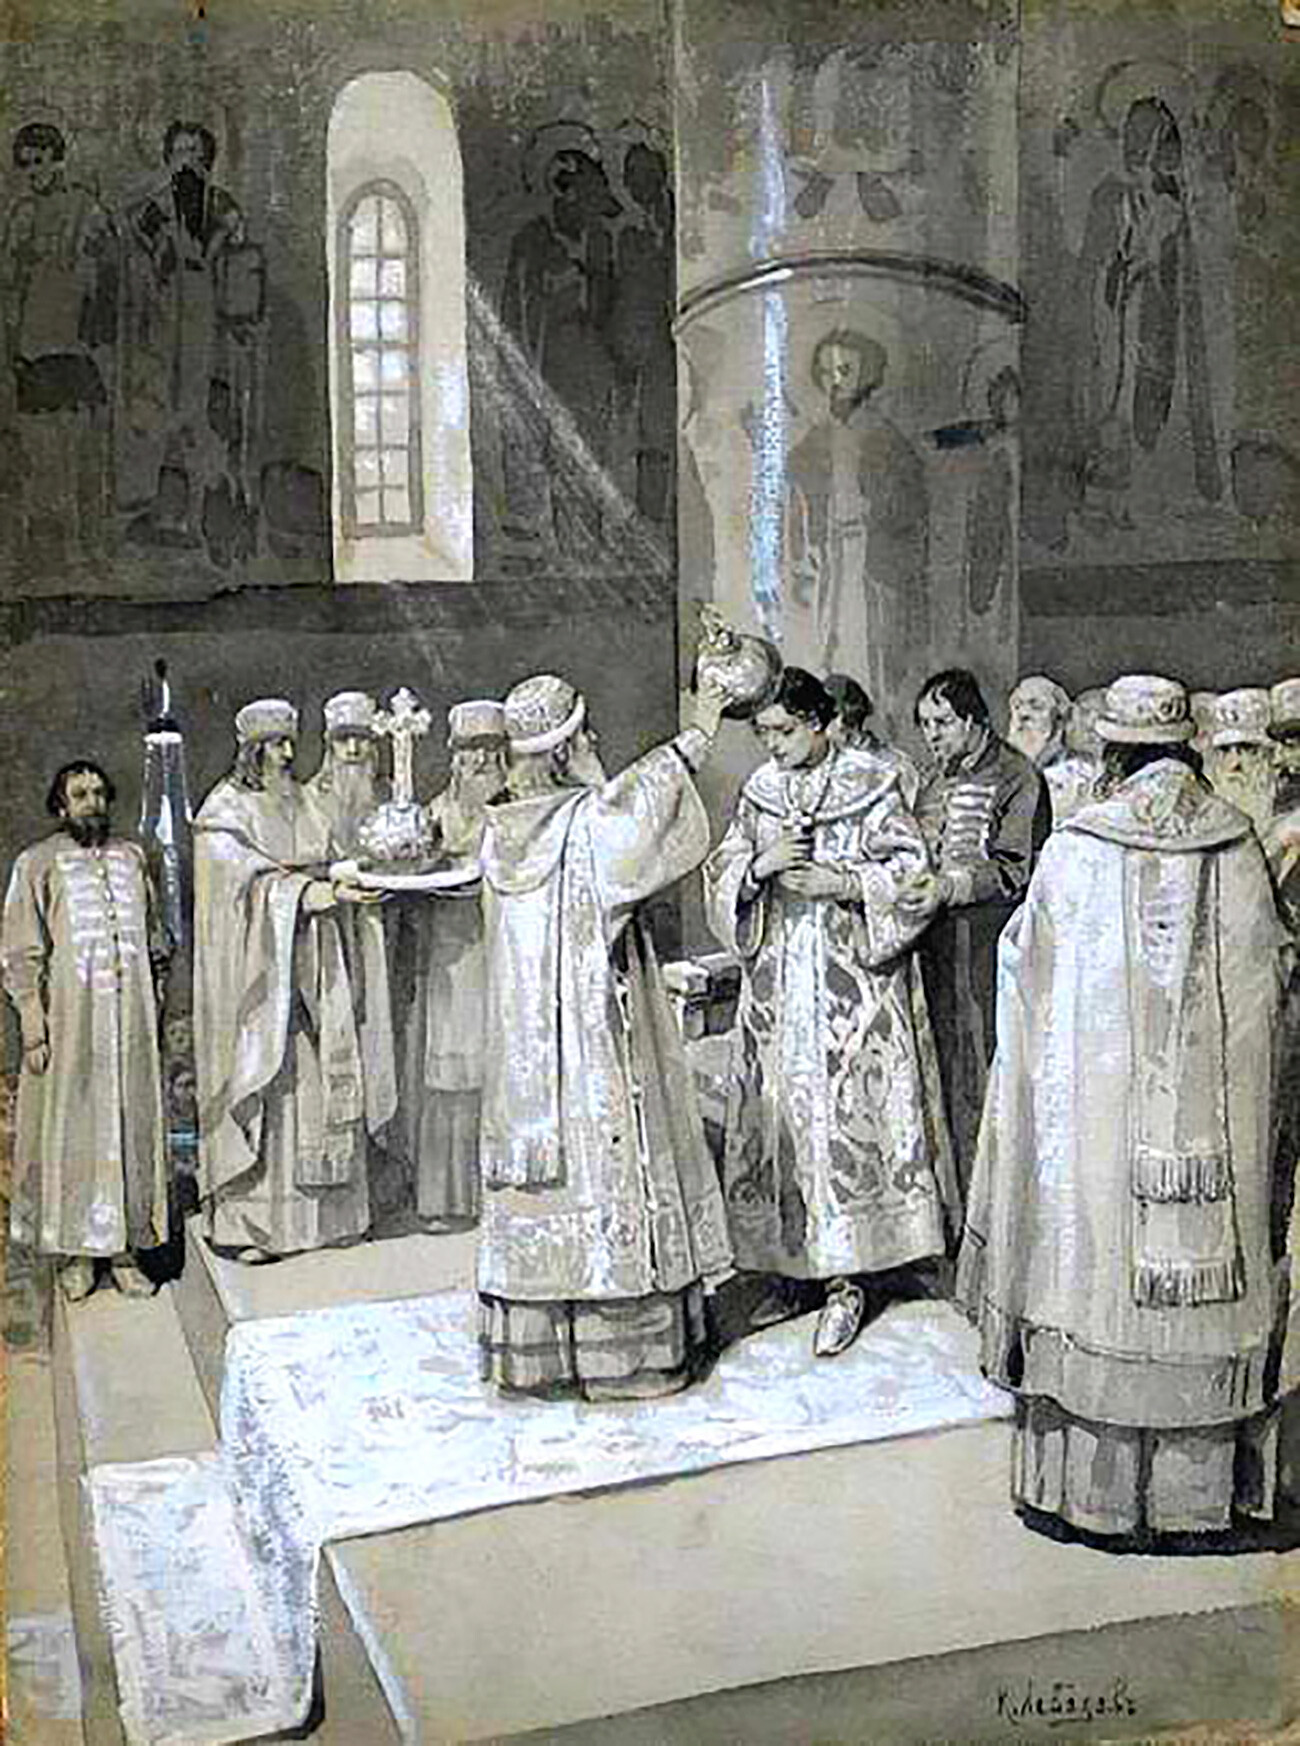 Ivan the Terrible being crowned as a tsar in 1547.